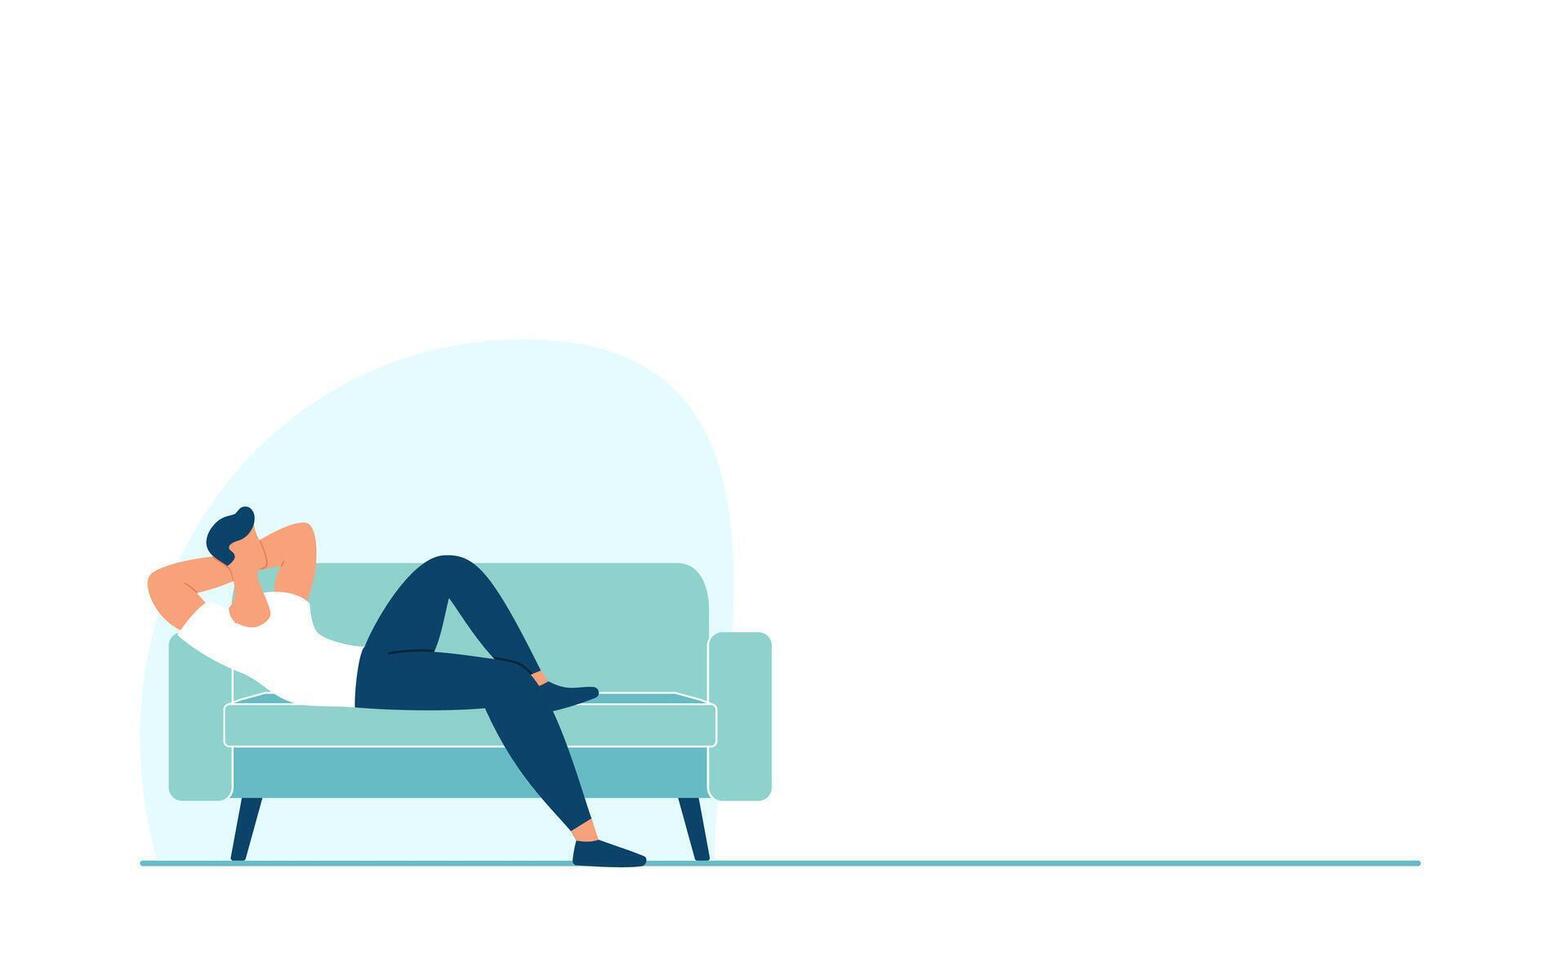 Character lying on sofa and relaxing, relaxed man in couch. Resting, lazy day, weekend. Procrastination concept. Happy dreaming. Trendy flat vector illustration.